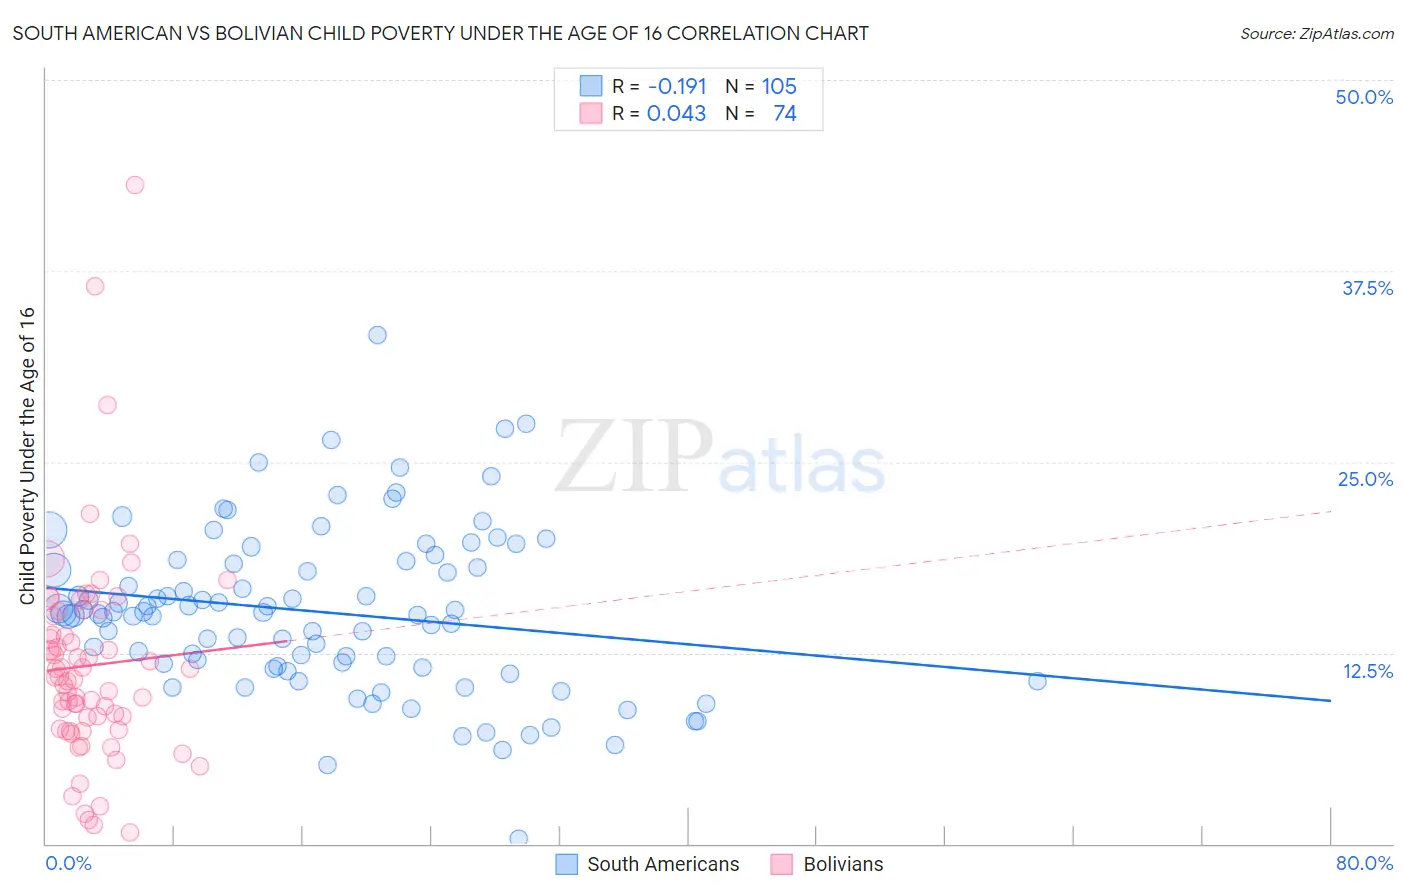 South American vs Bolivian Child Poverty Under the Age of 16